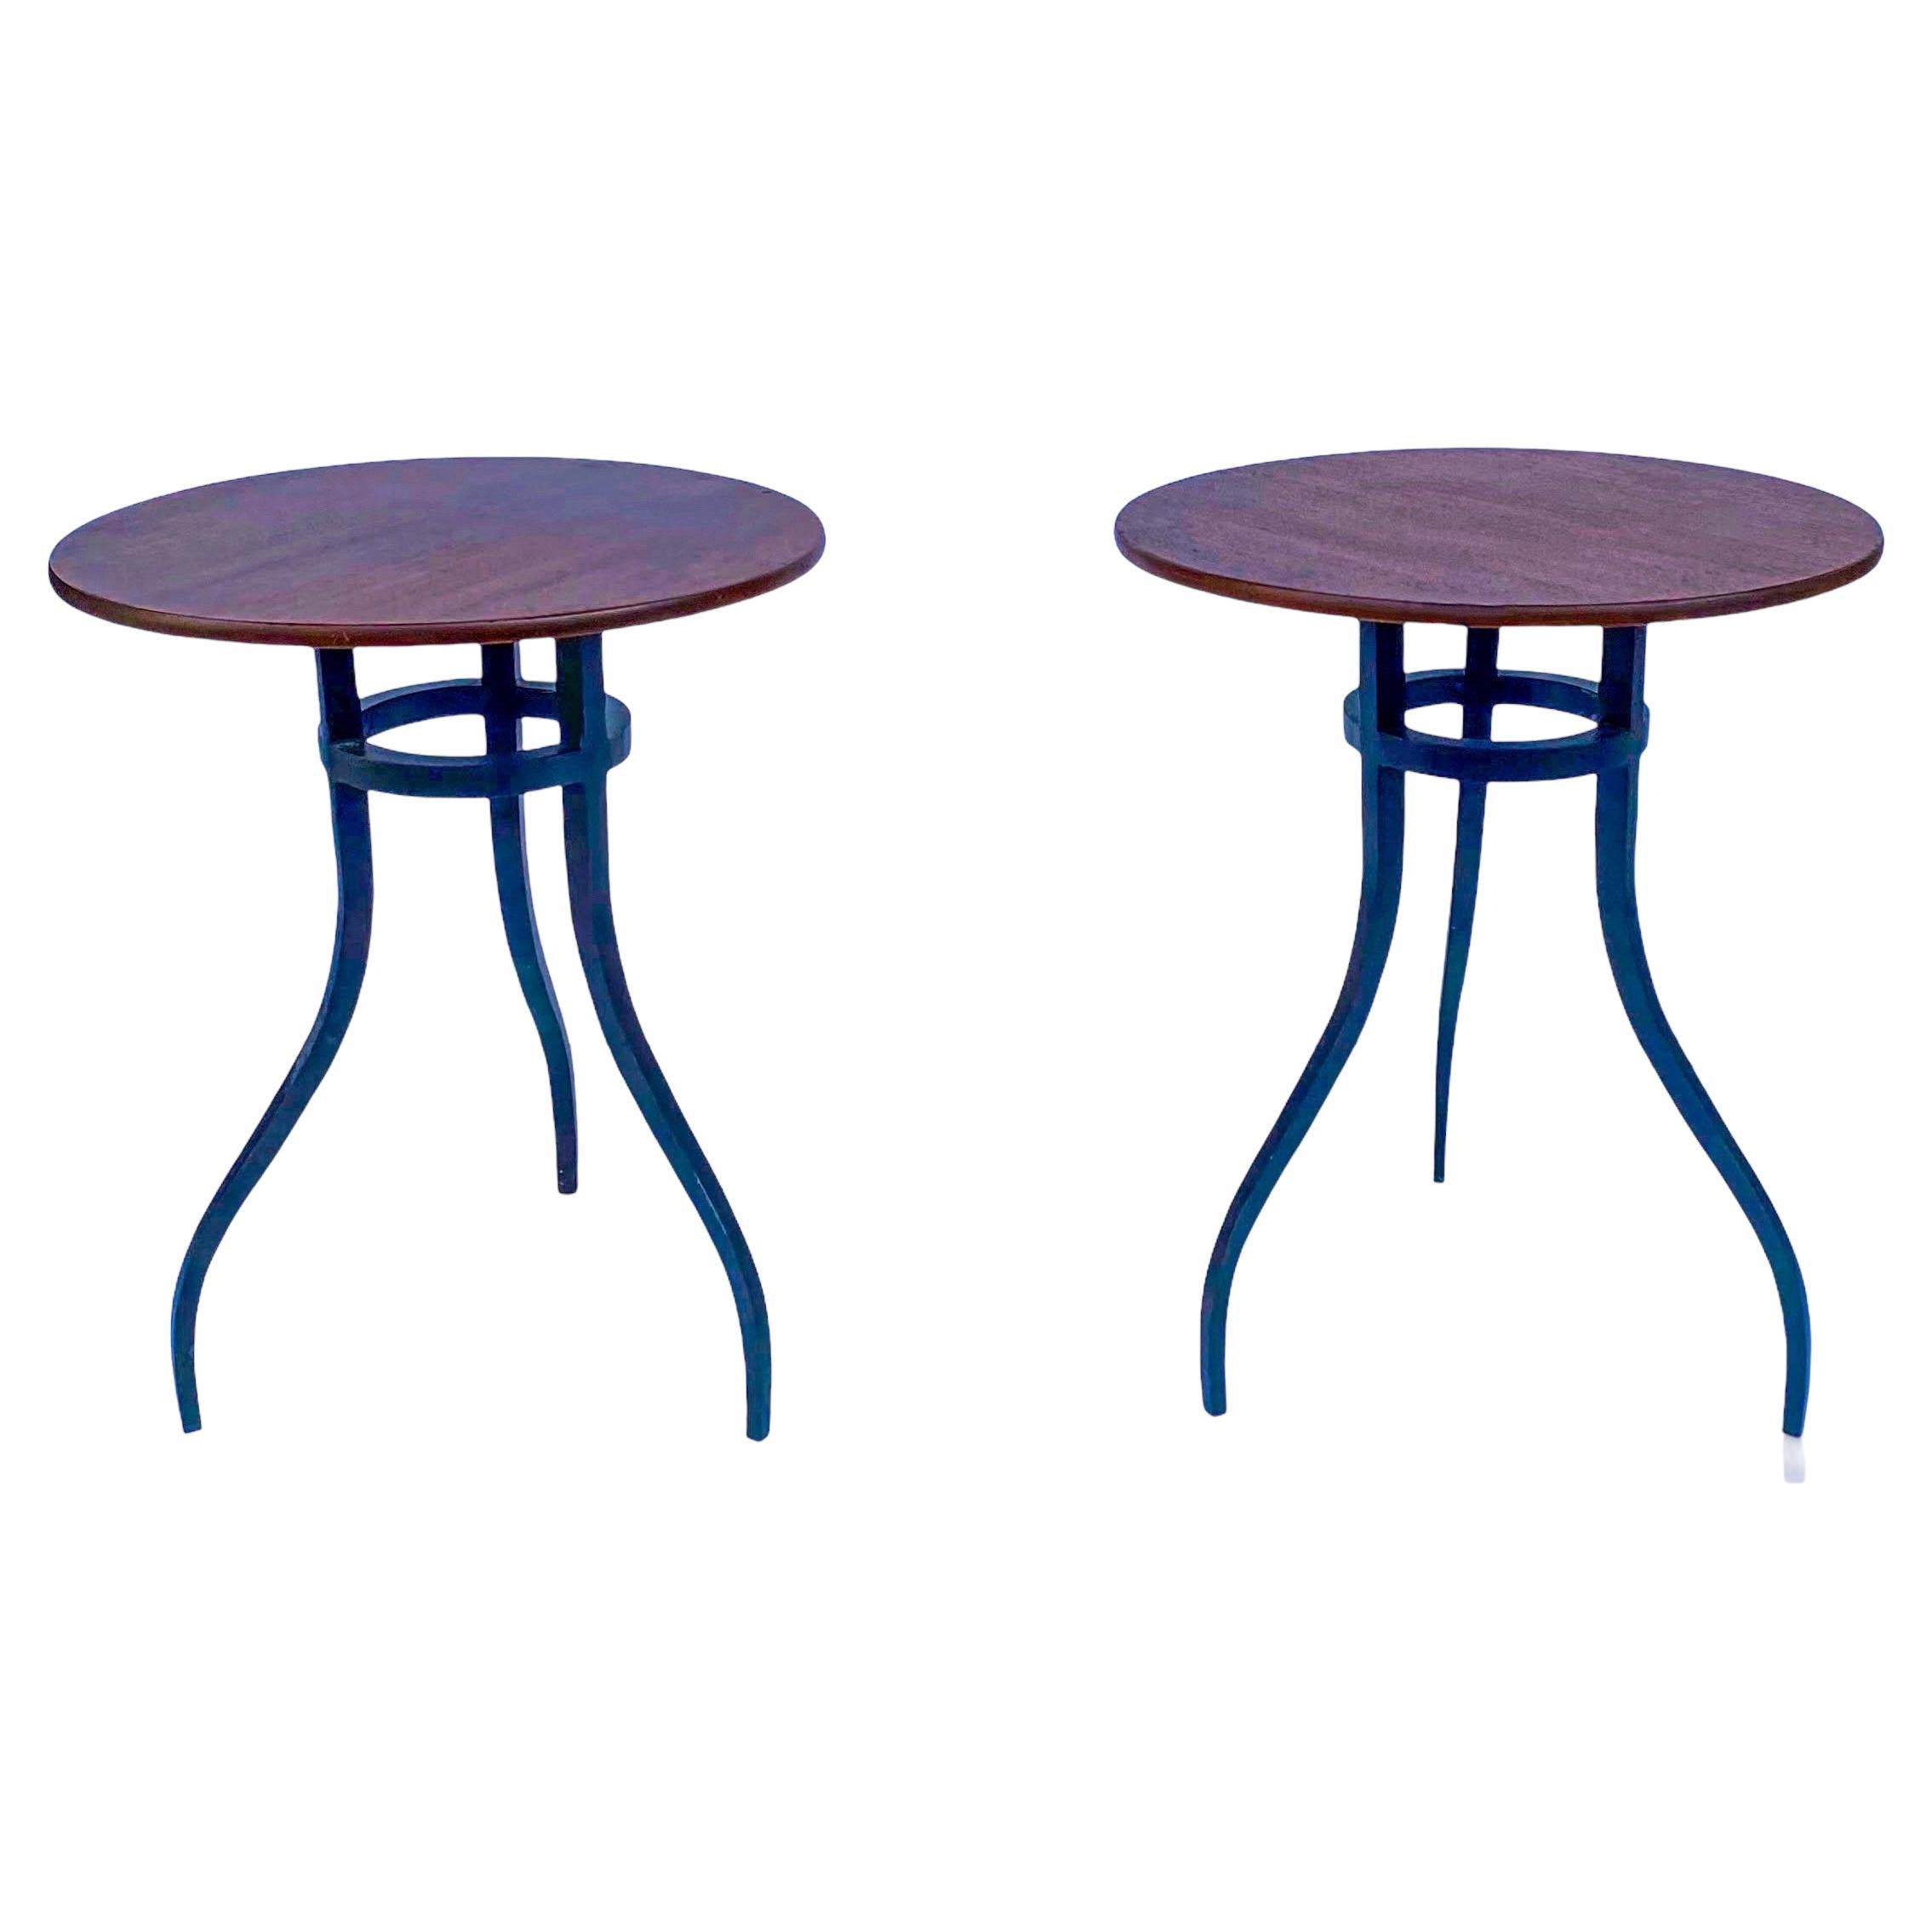 Baker Milling Road British Colonial Style Mahogany & Wrought Iron Side Tables -2 For Sale